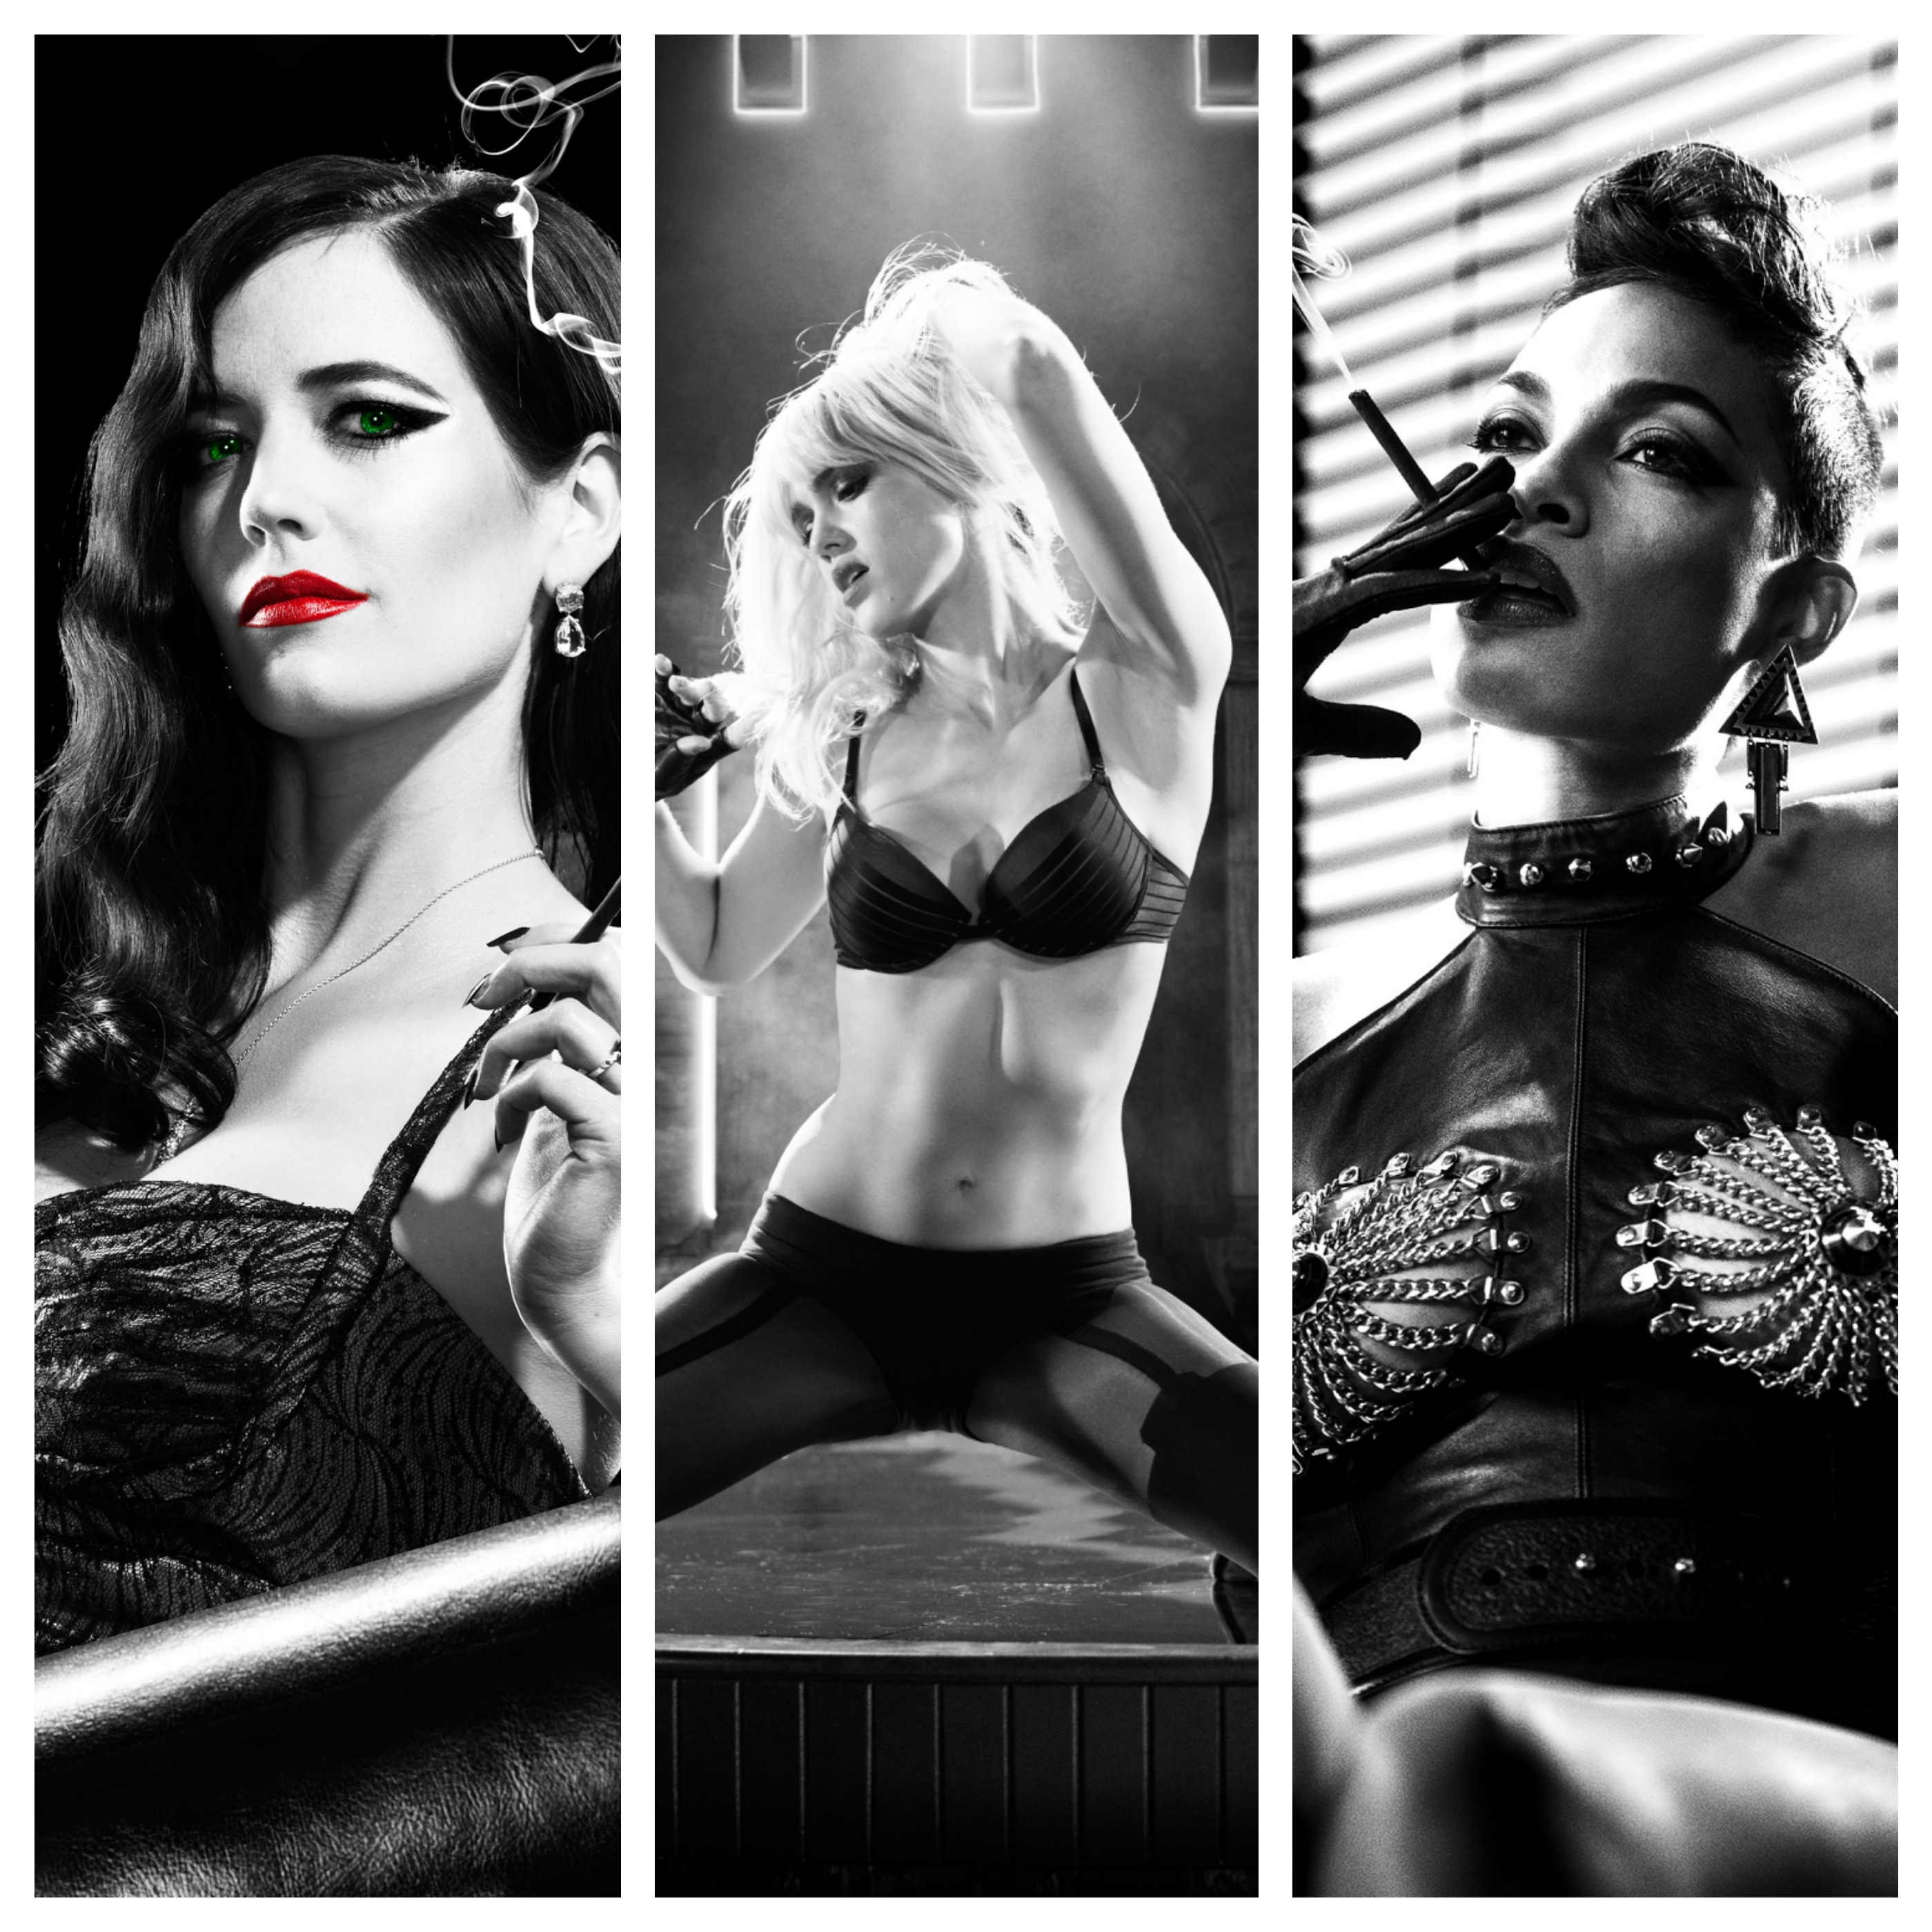 L-R) Some of the ladies in "Sin City": Eva Green as Ava Lord, Jes...